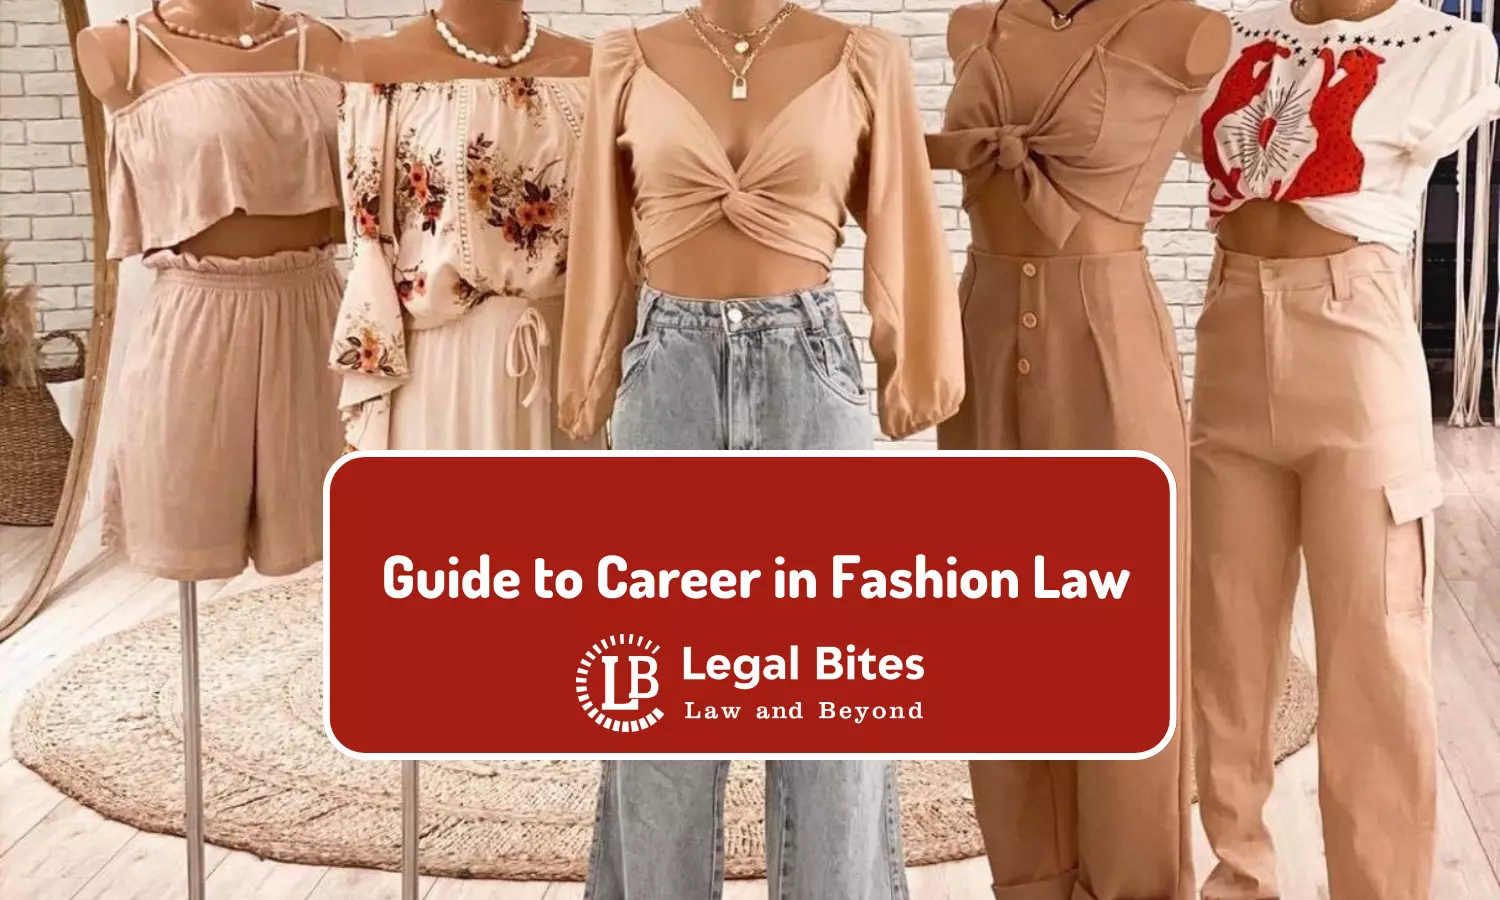 Guide to Career in Fashion Law